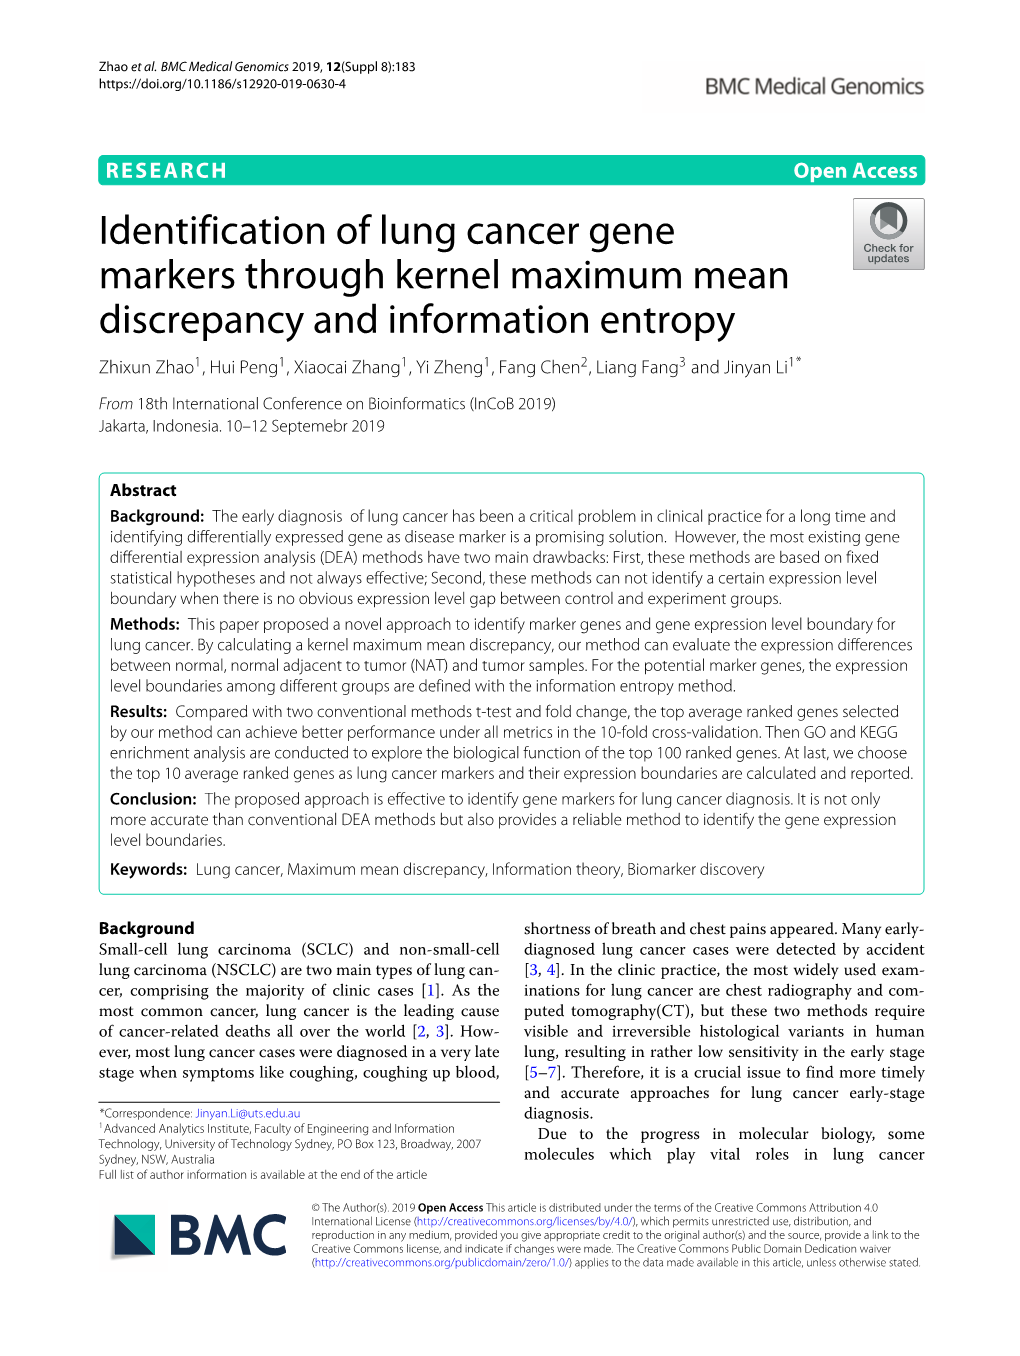 Identification of Lung Cancer Gene Markers Through Kernel Maximum